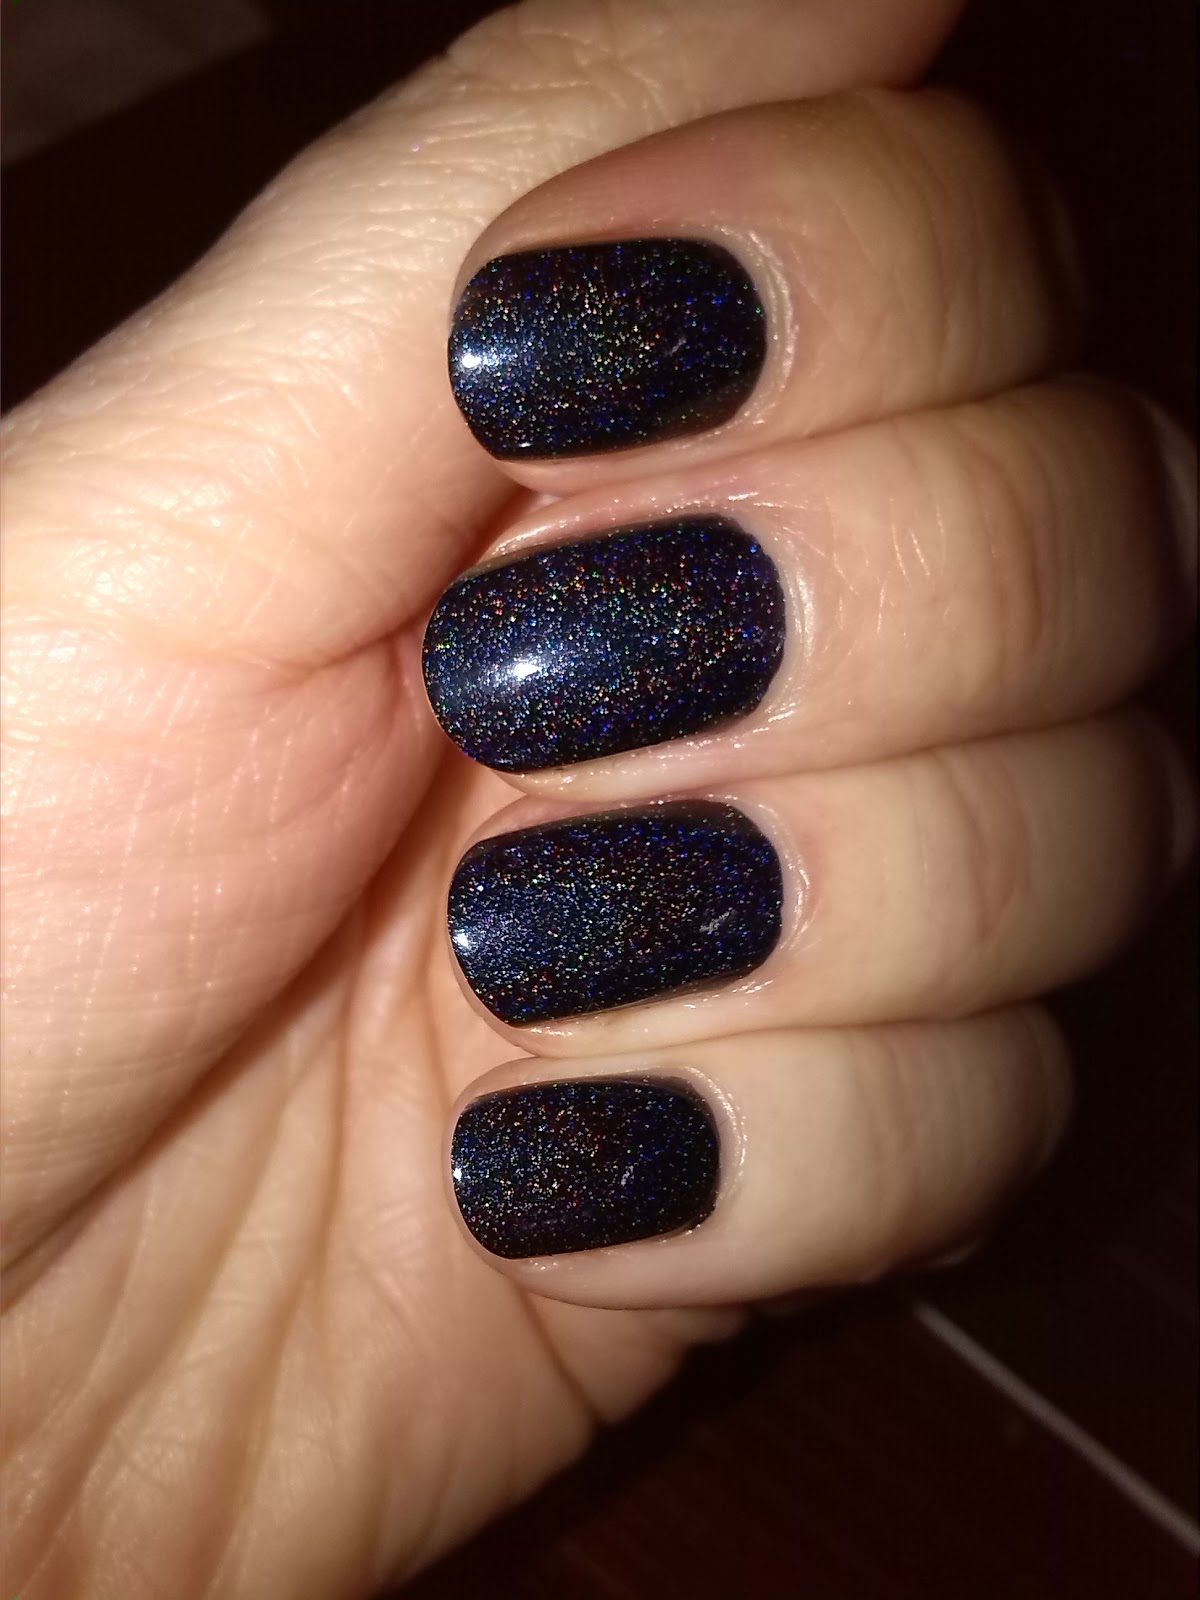 Lilypad Lacquer Rainbows in space